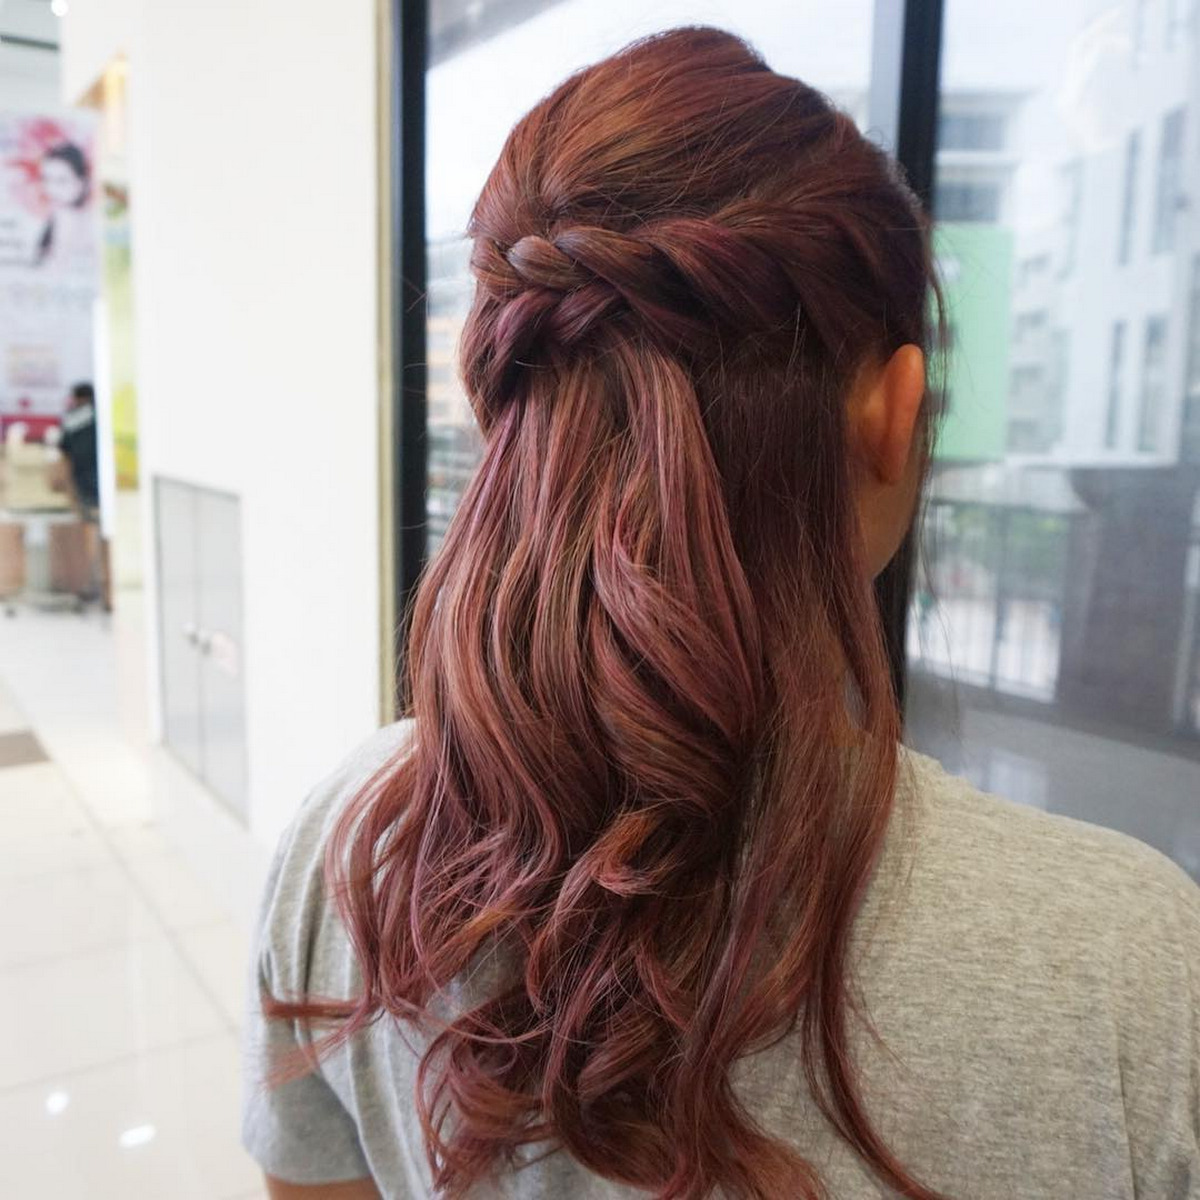 Braid Burgundy Brown With Rose Gold Highlights